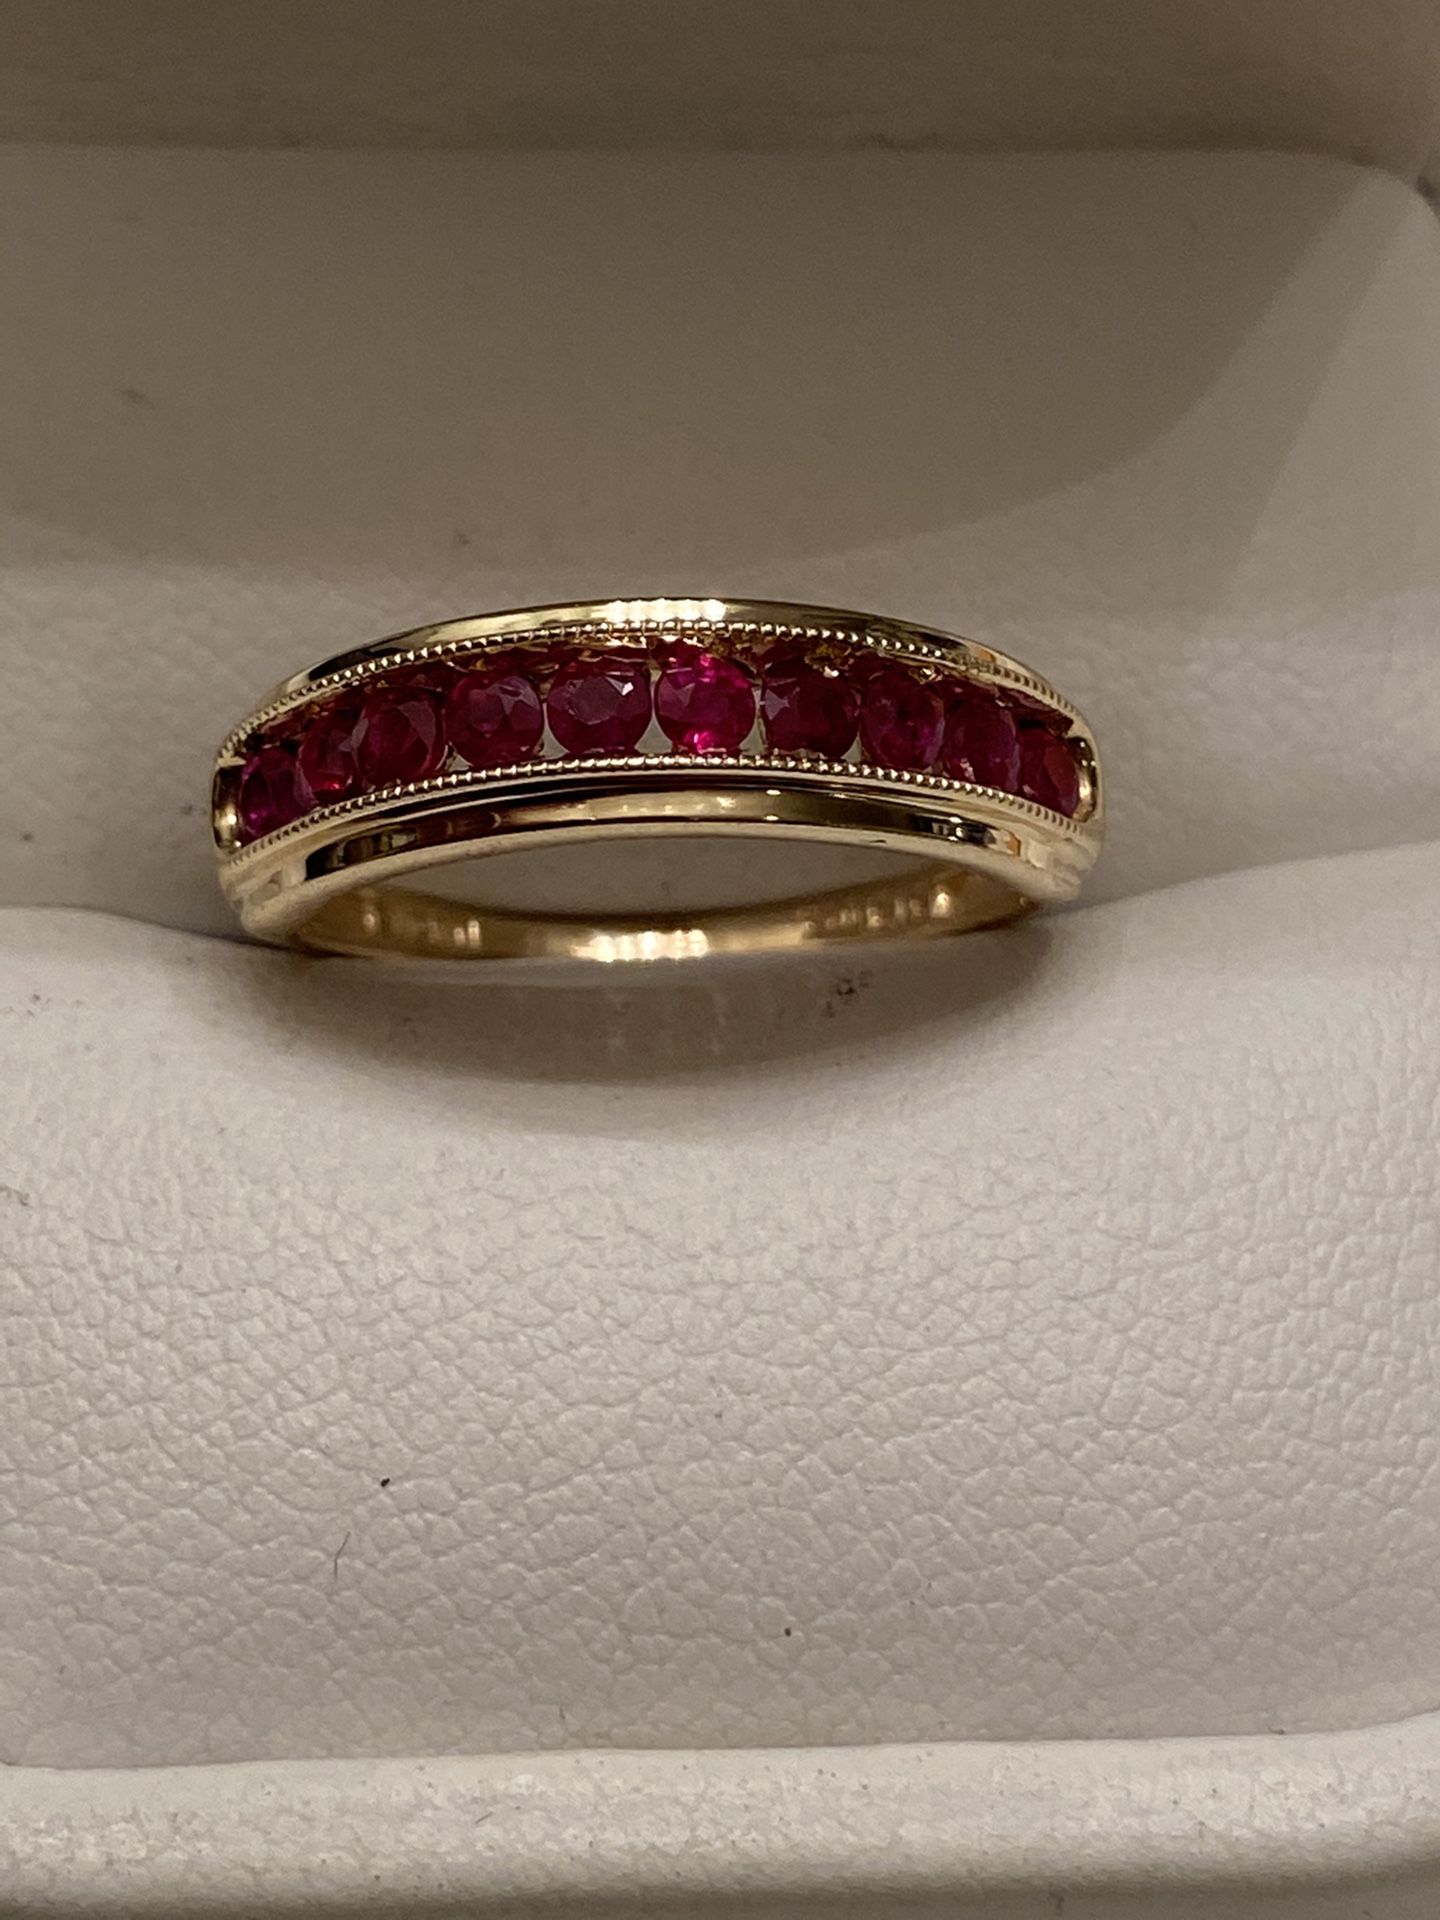 BEAUTIFUL GOLD & RUBY RING SIZE 7